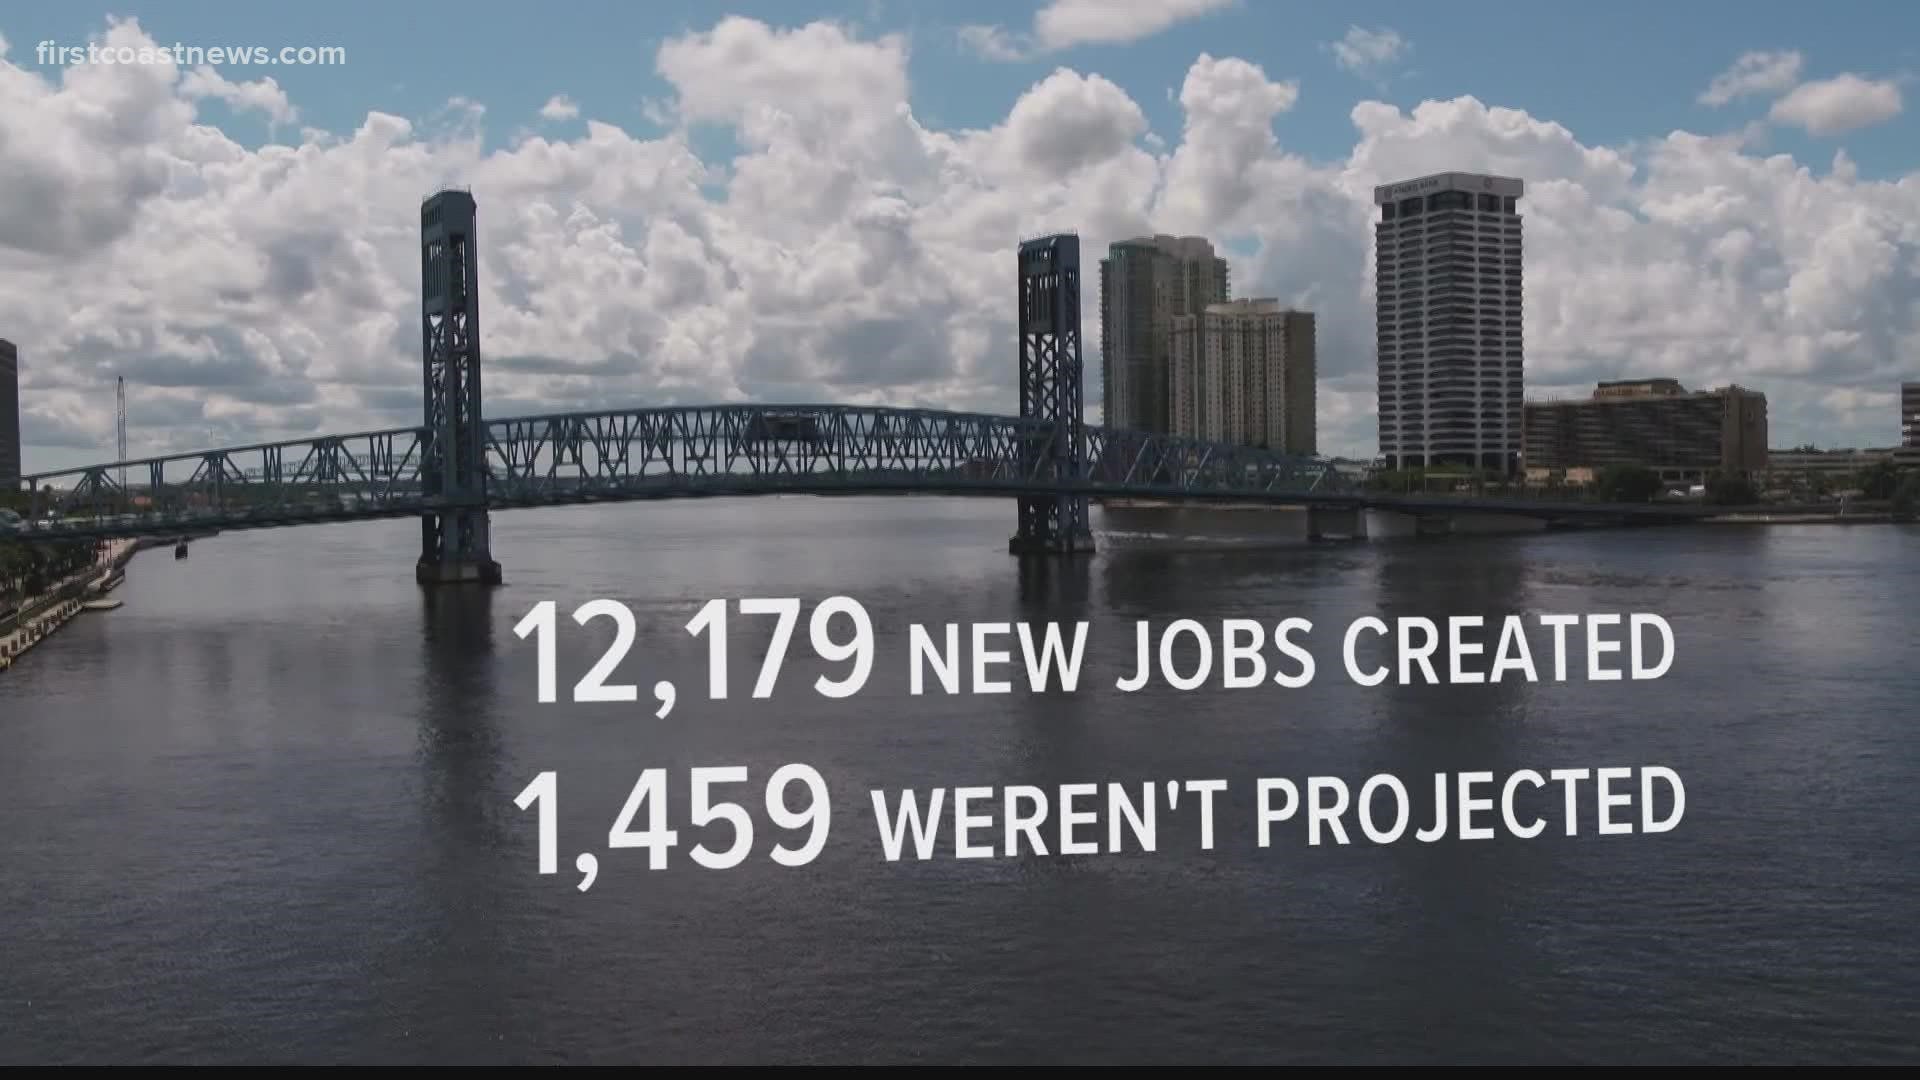 Since Mayor Lenny Curry took office in July 2015, data shows more than 12,000 new jobs have been created in Jacksonville.